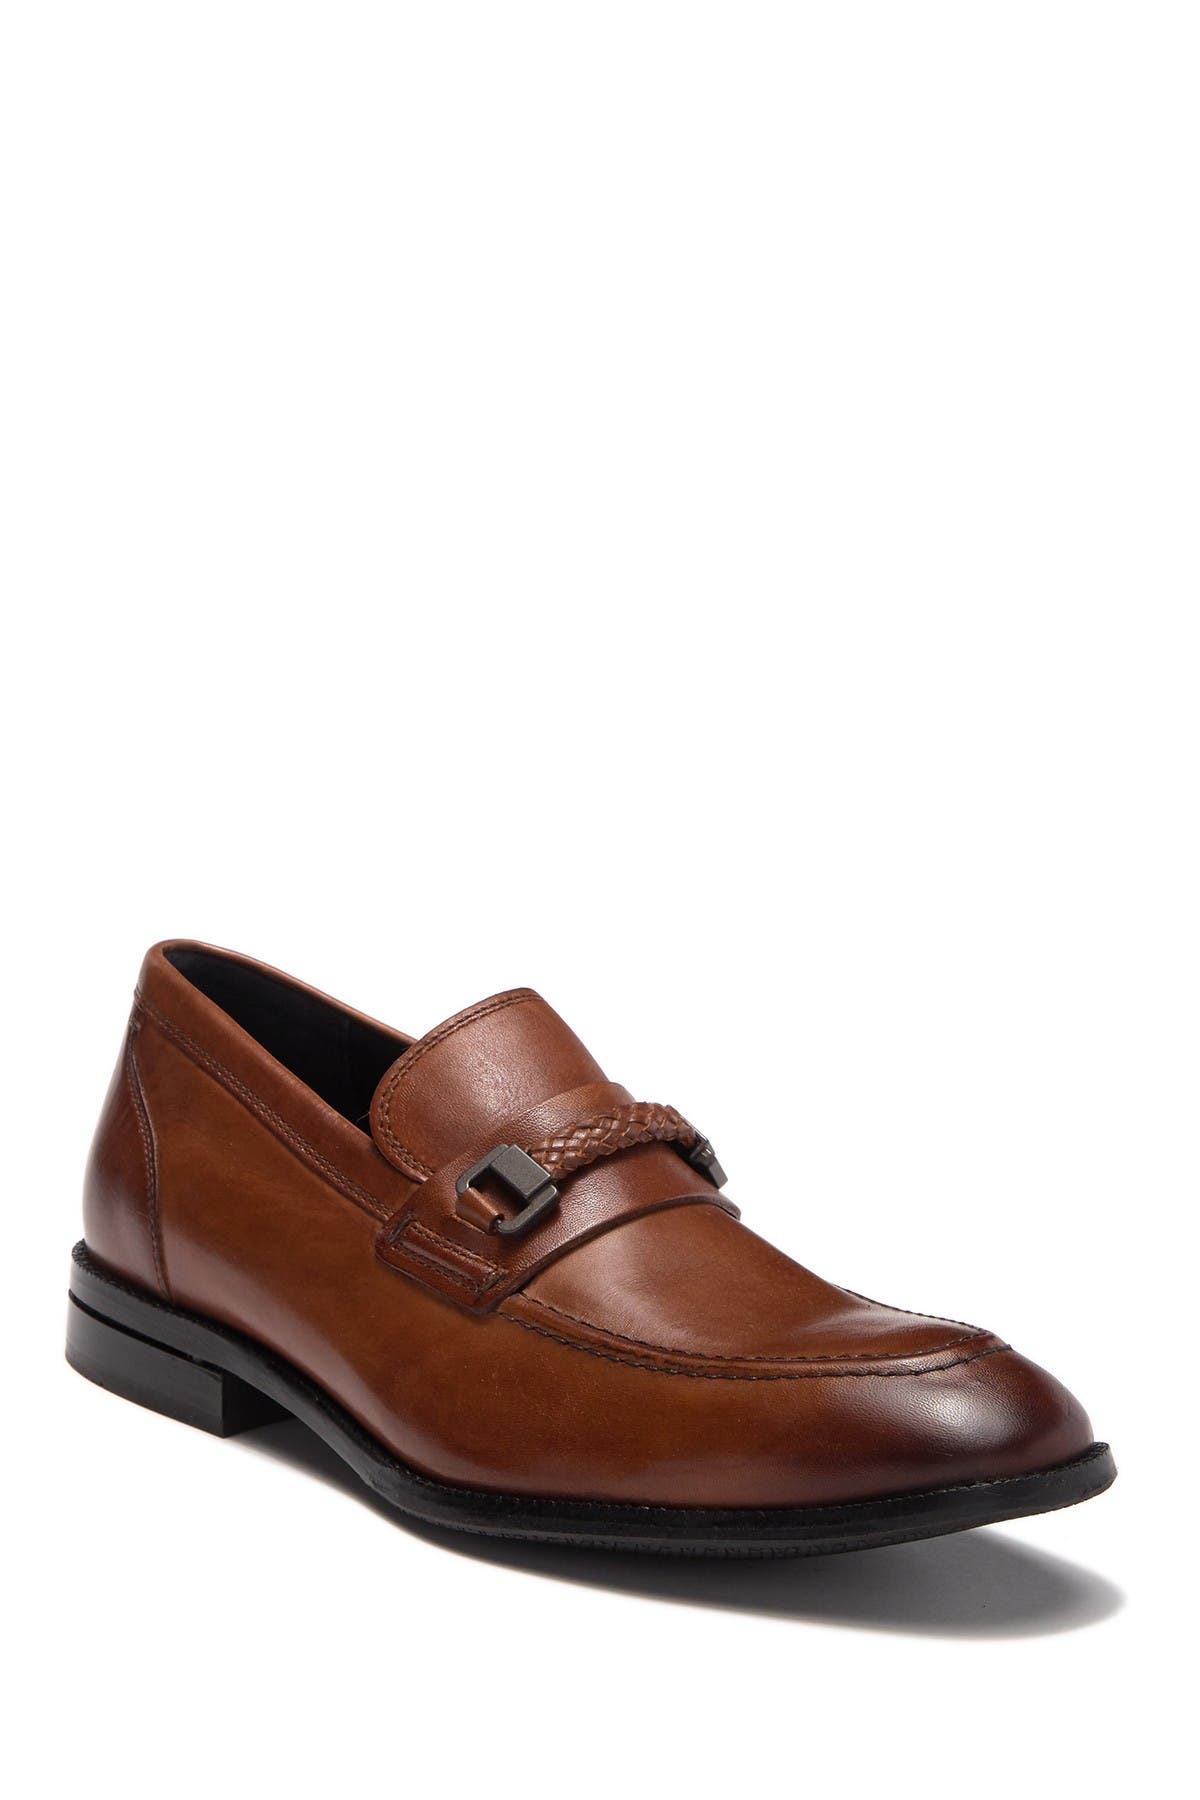 cole haan mens shoes loafers